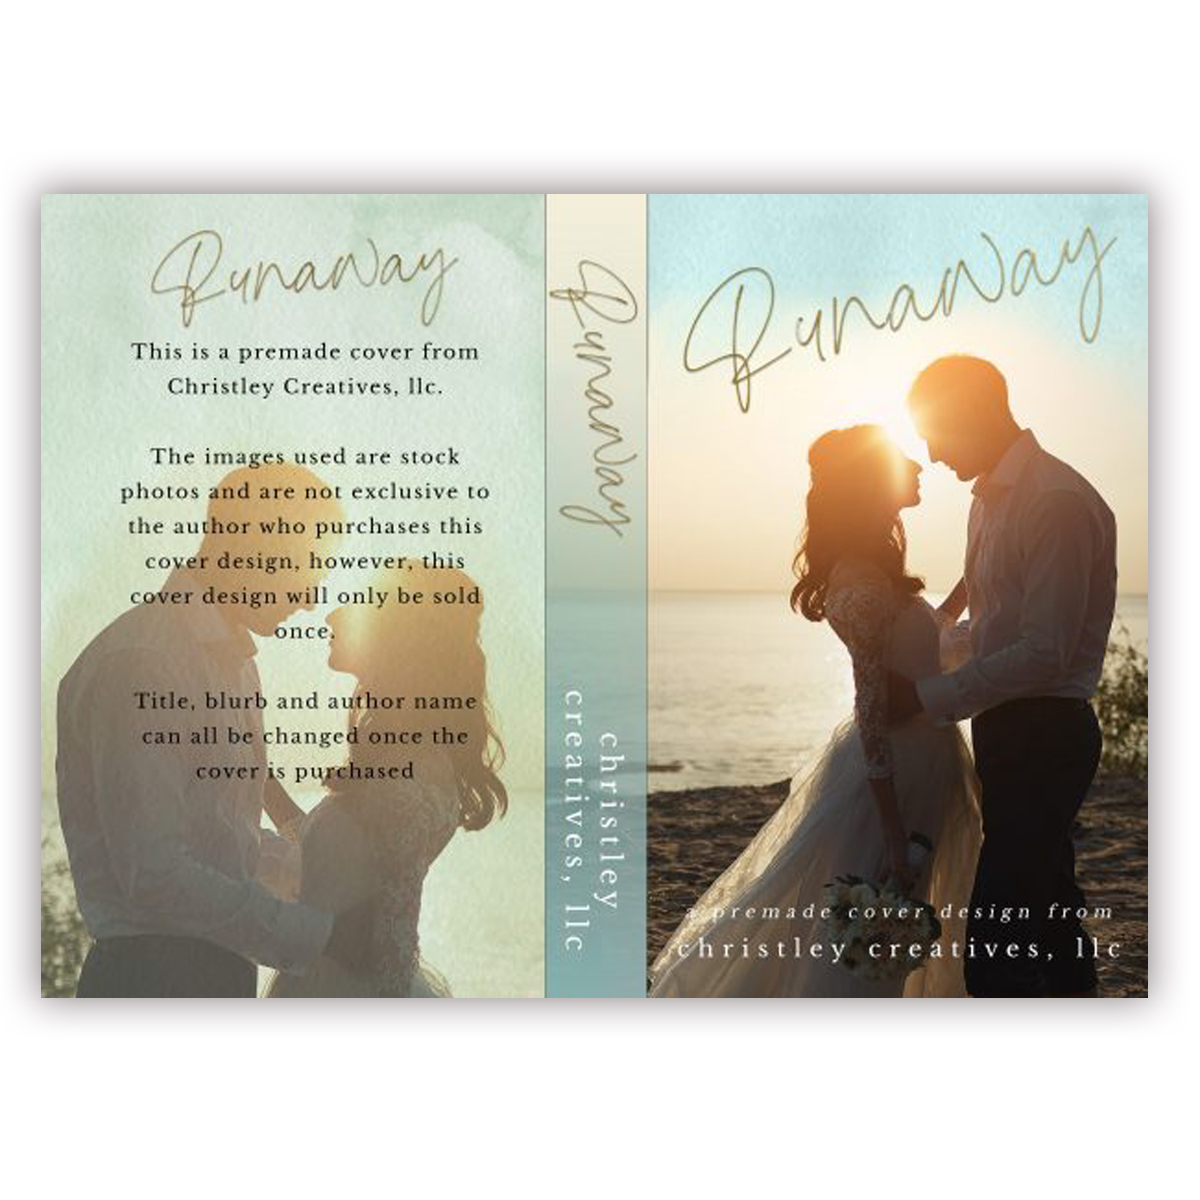 Runaway - Premade Contemporary Romance Book Cover from Christley Creatives